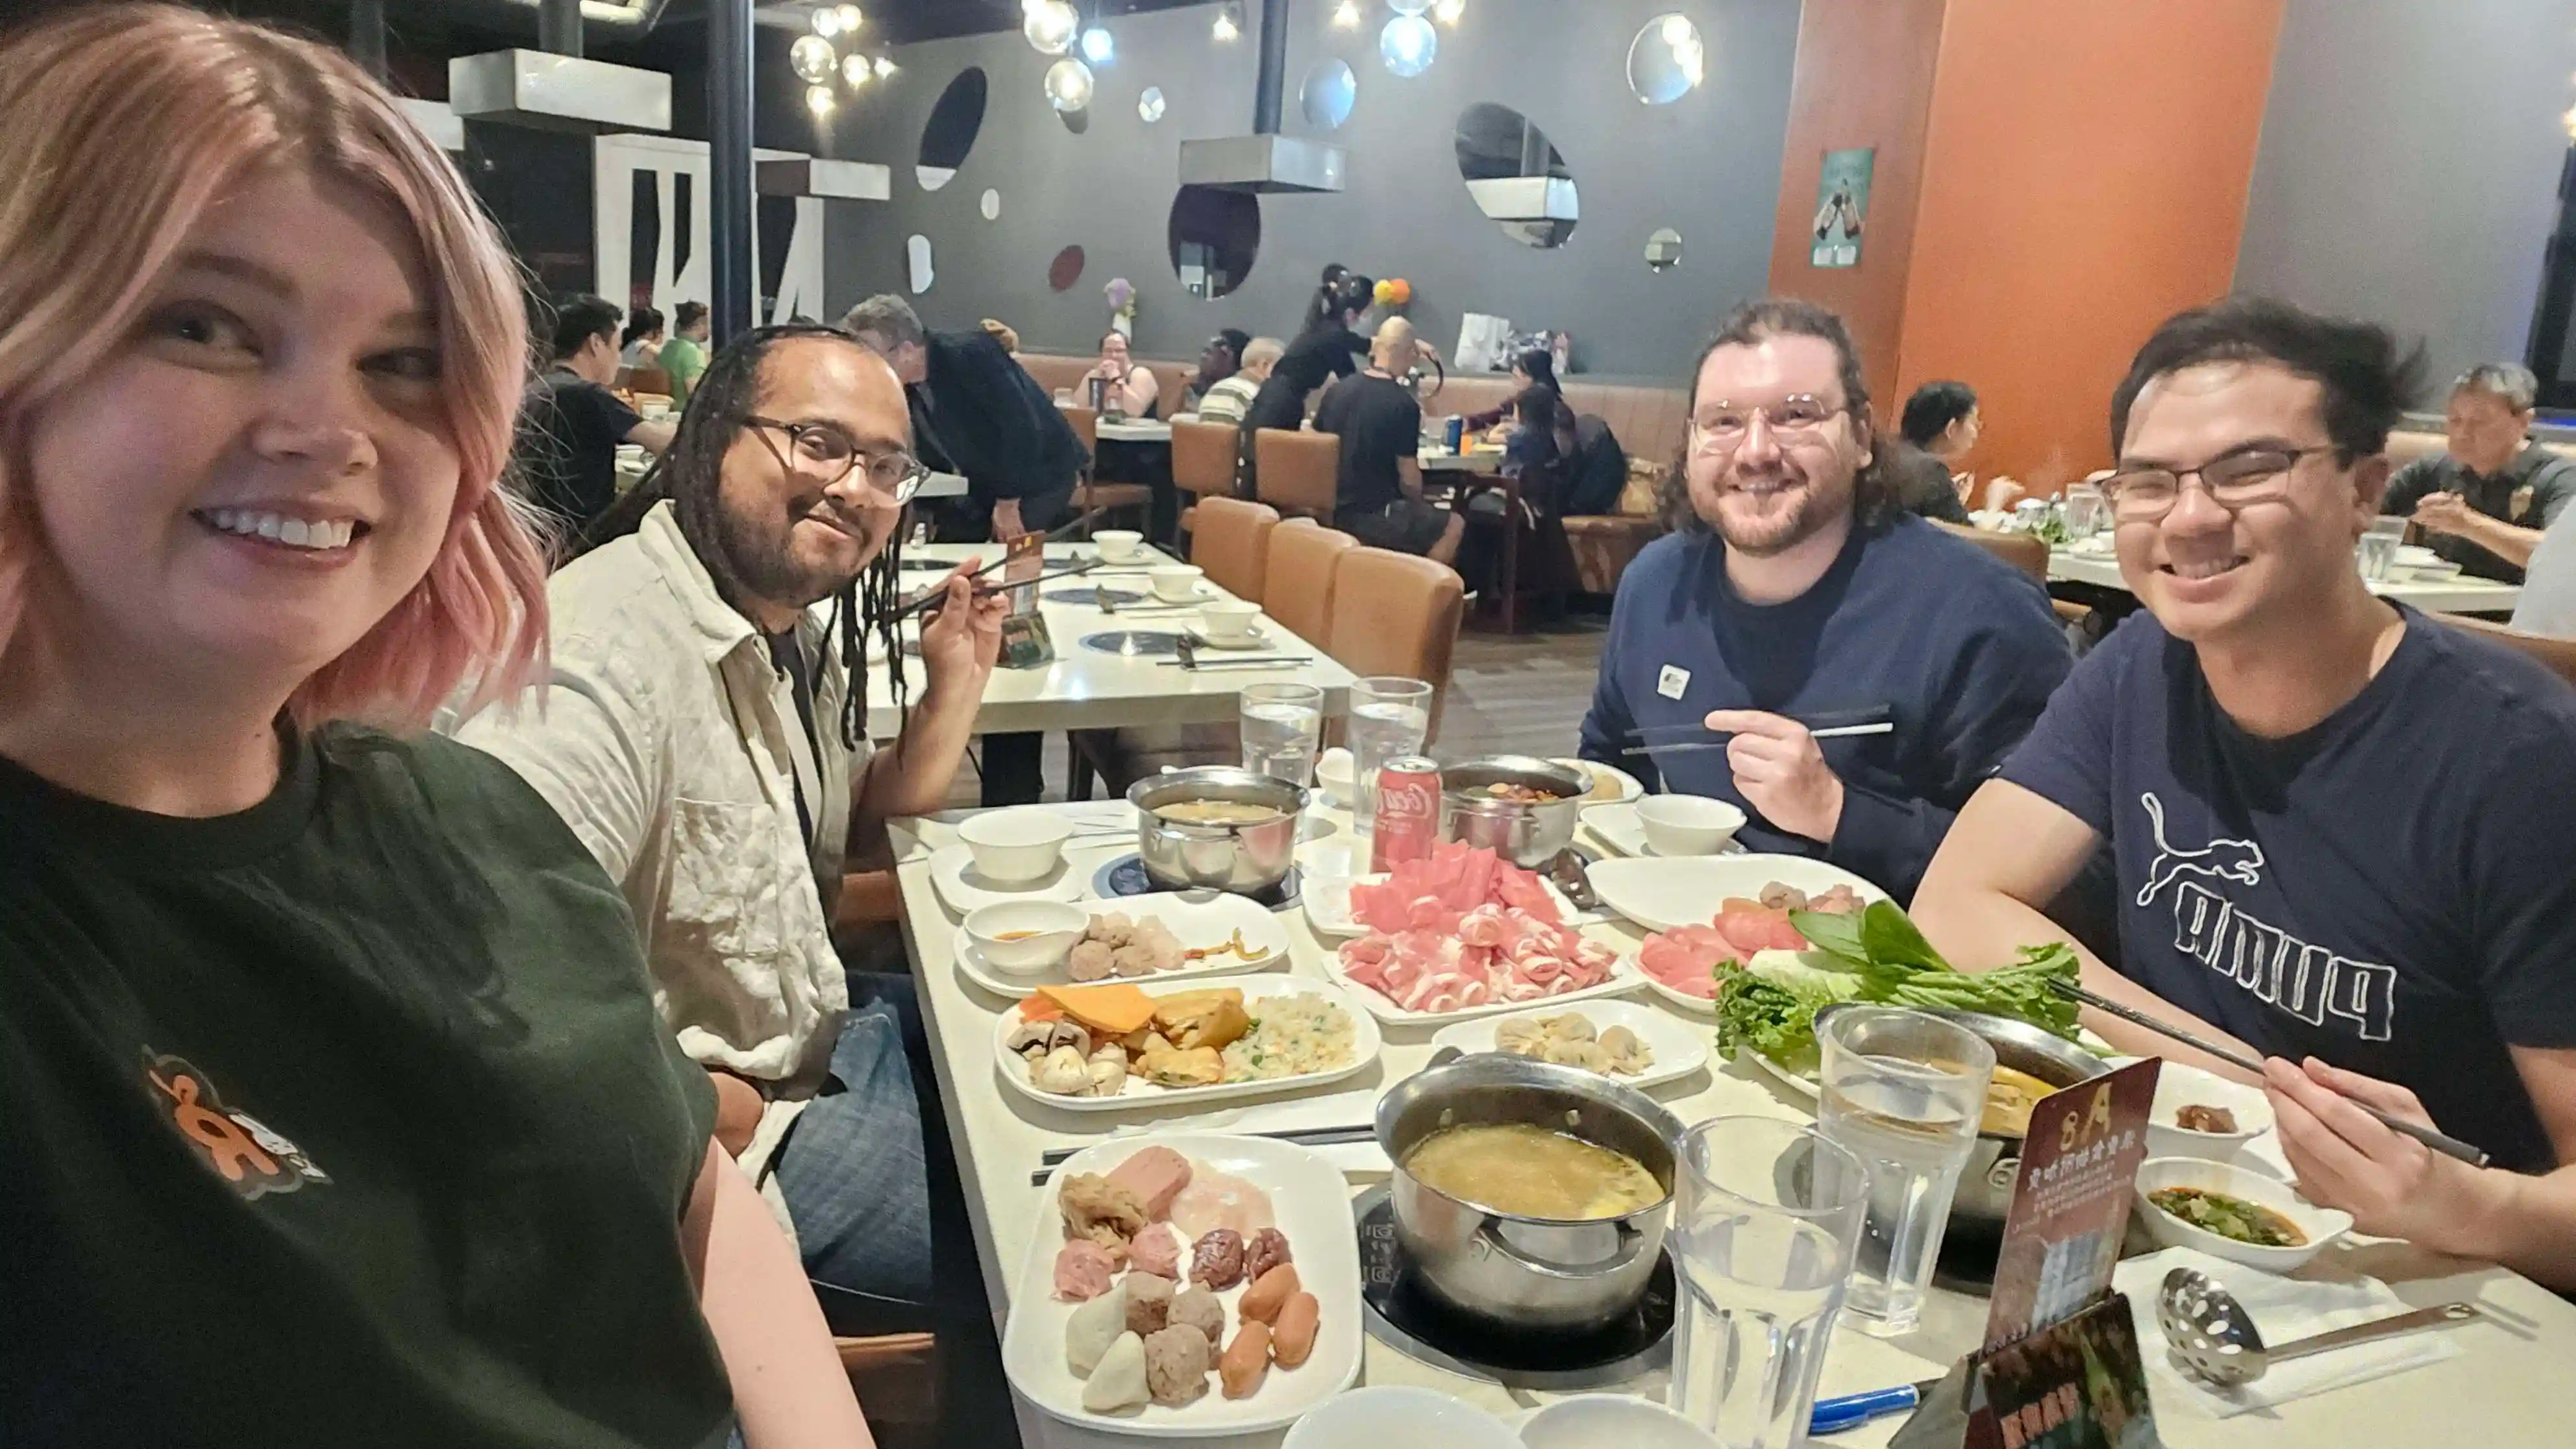 Photo of the Caldera Interactive team eating dinner together